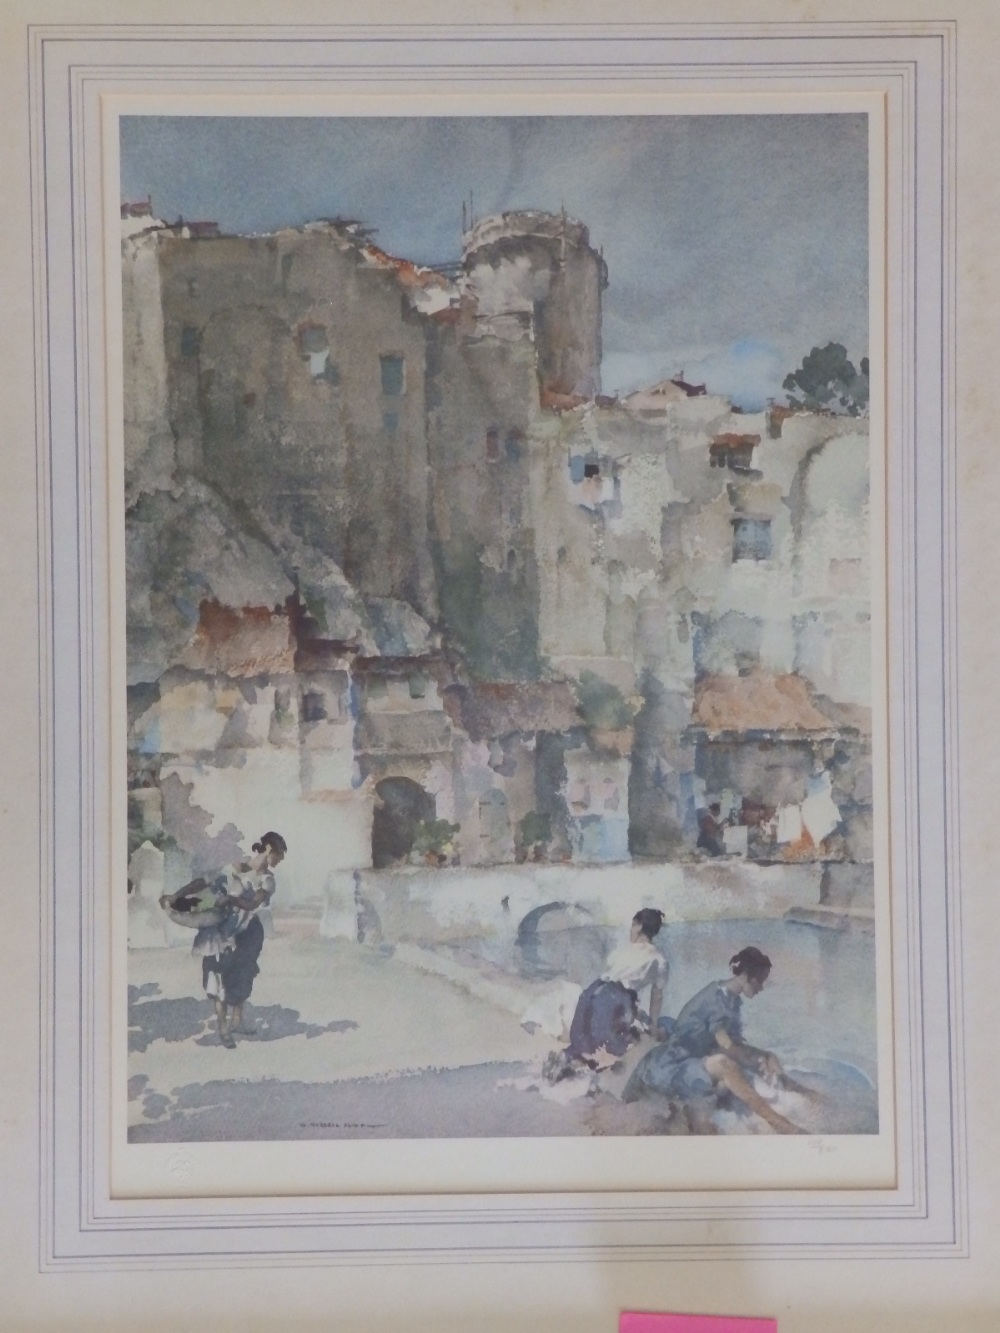 A signed Russell Flint colour print - Peasant girls in a Mediterranean town - 109/850, 19.5" x 14".